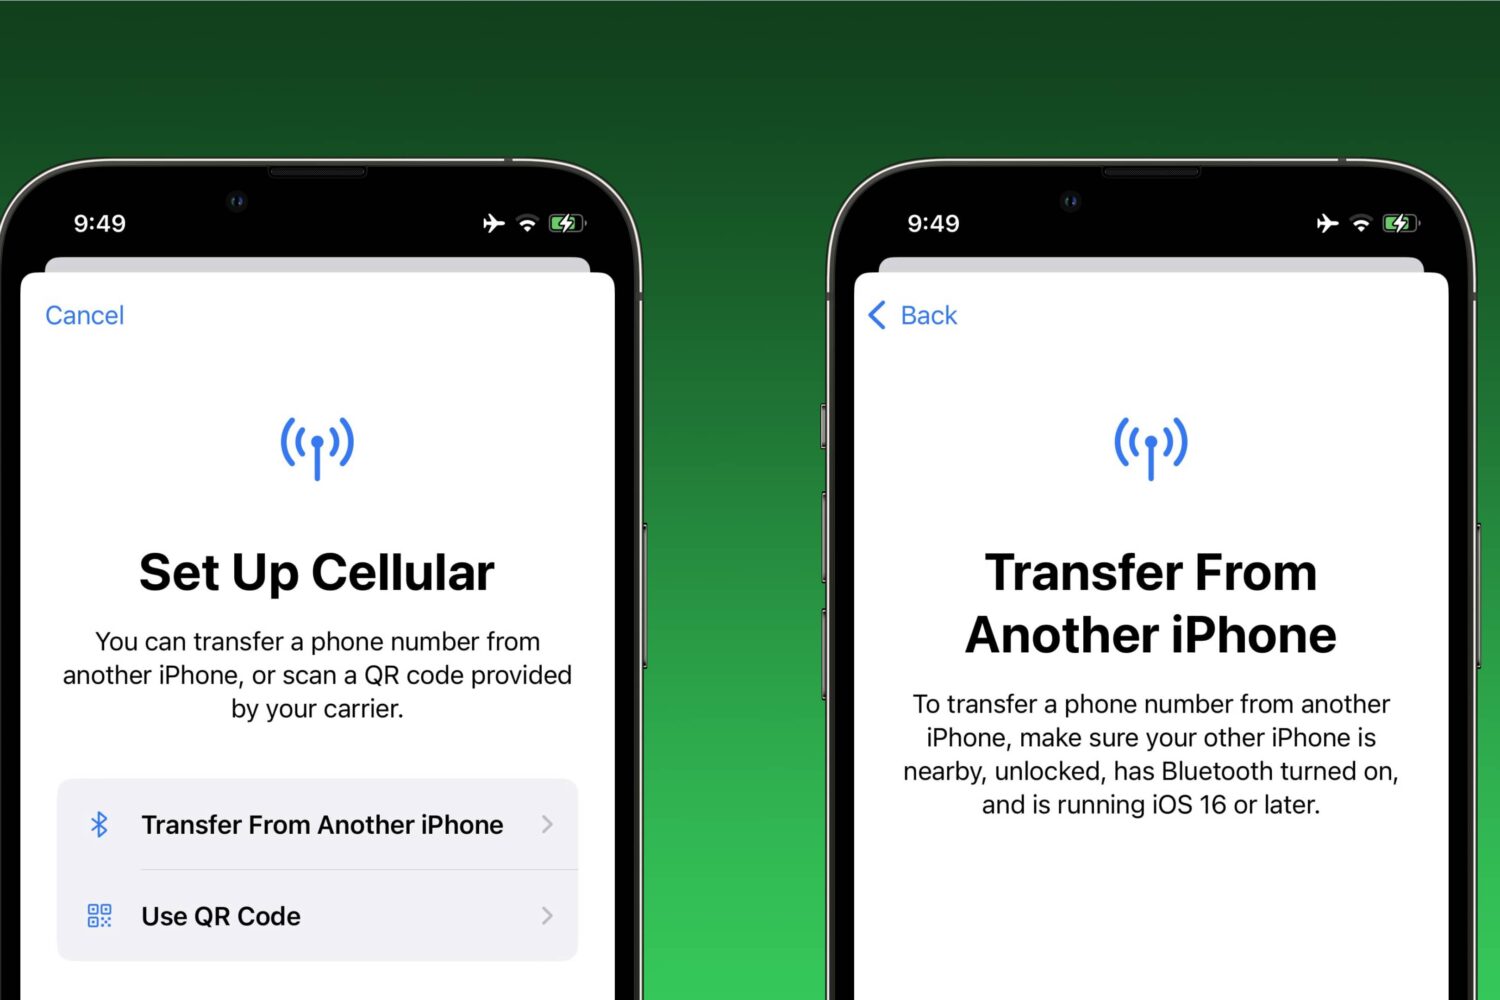 Two device screenshots demonstrating transferring an eSIM from one iPhone to another via Bluetooth, which is one of the new features of Apple's iOS 16 software